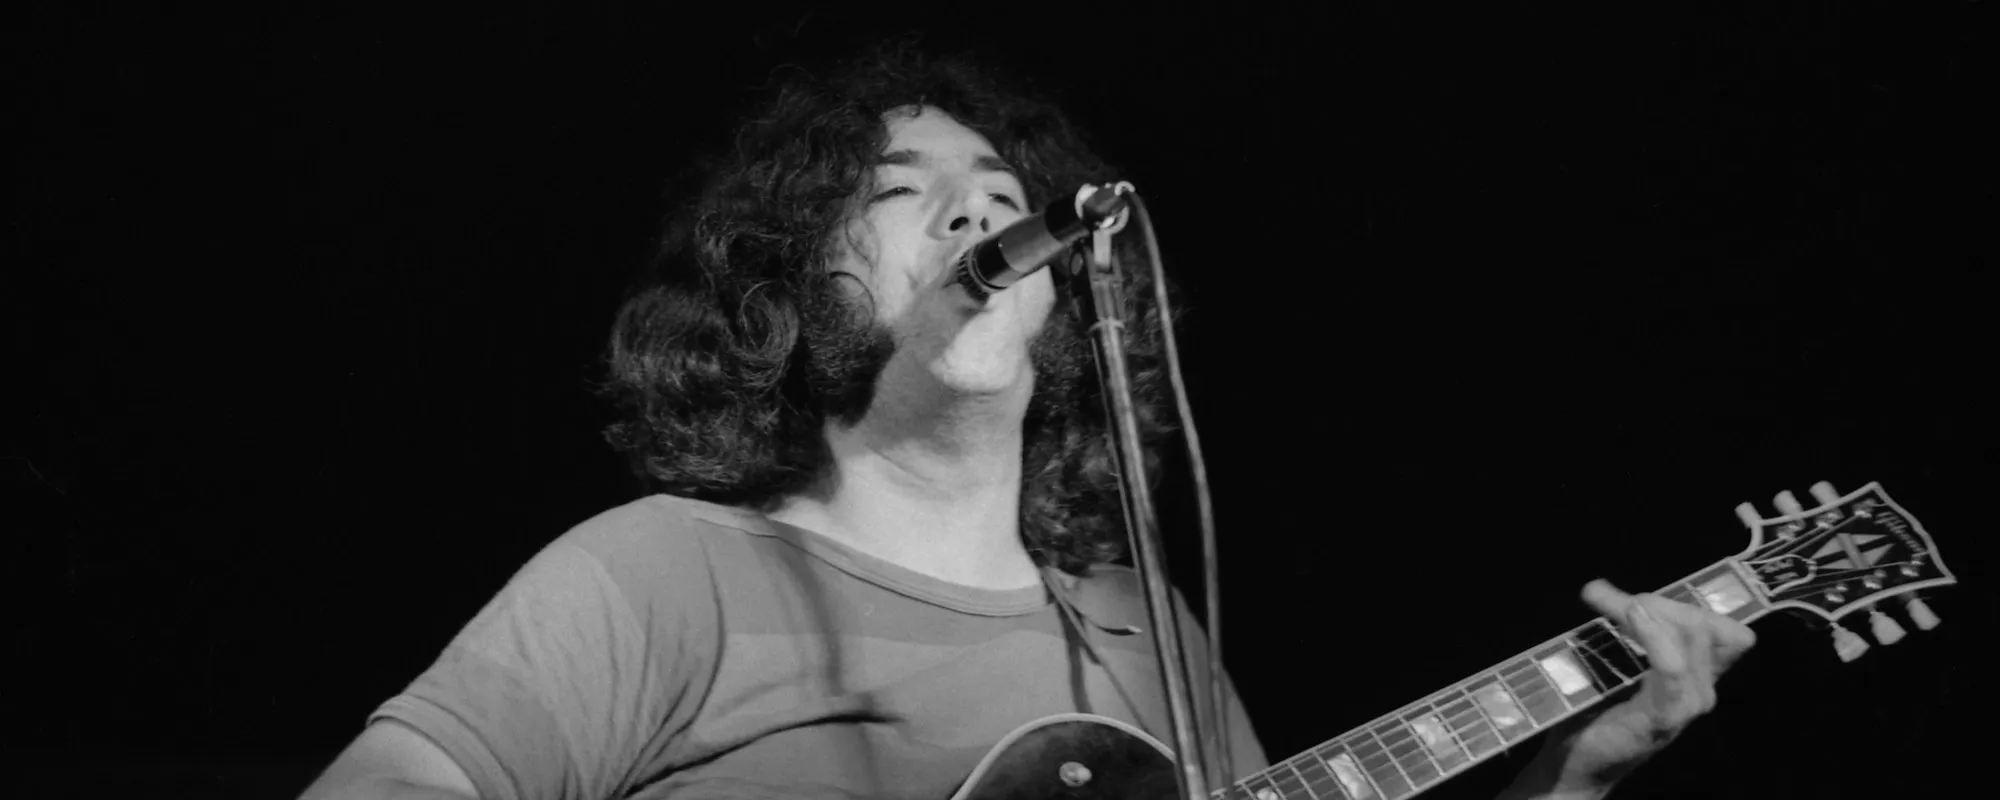 From “Cream Puff War” to “Terrapin Station”: The 3 Songs Jerry Garcia Wrote Solo for Grateful Dead